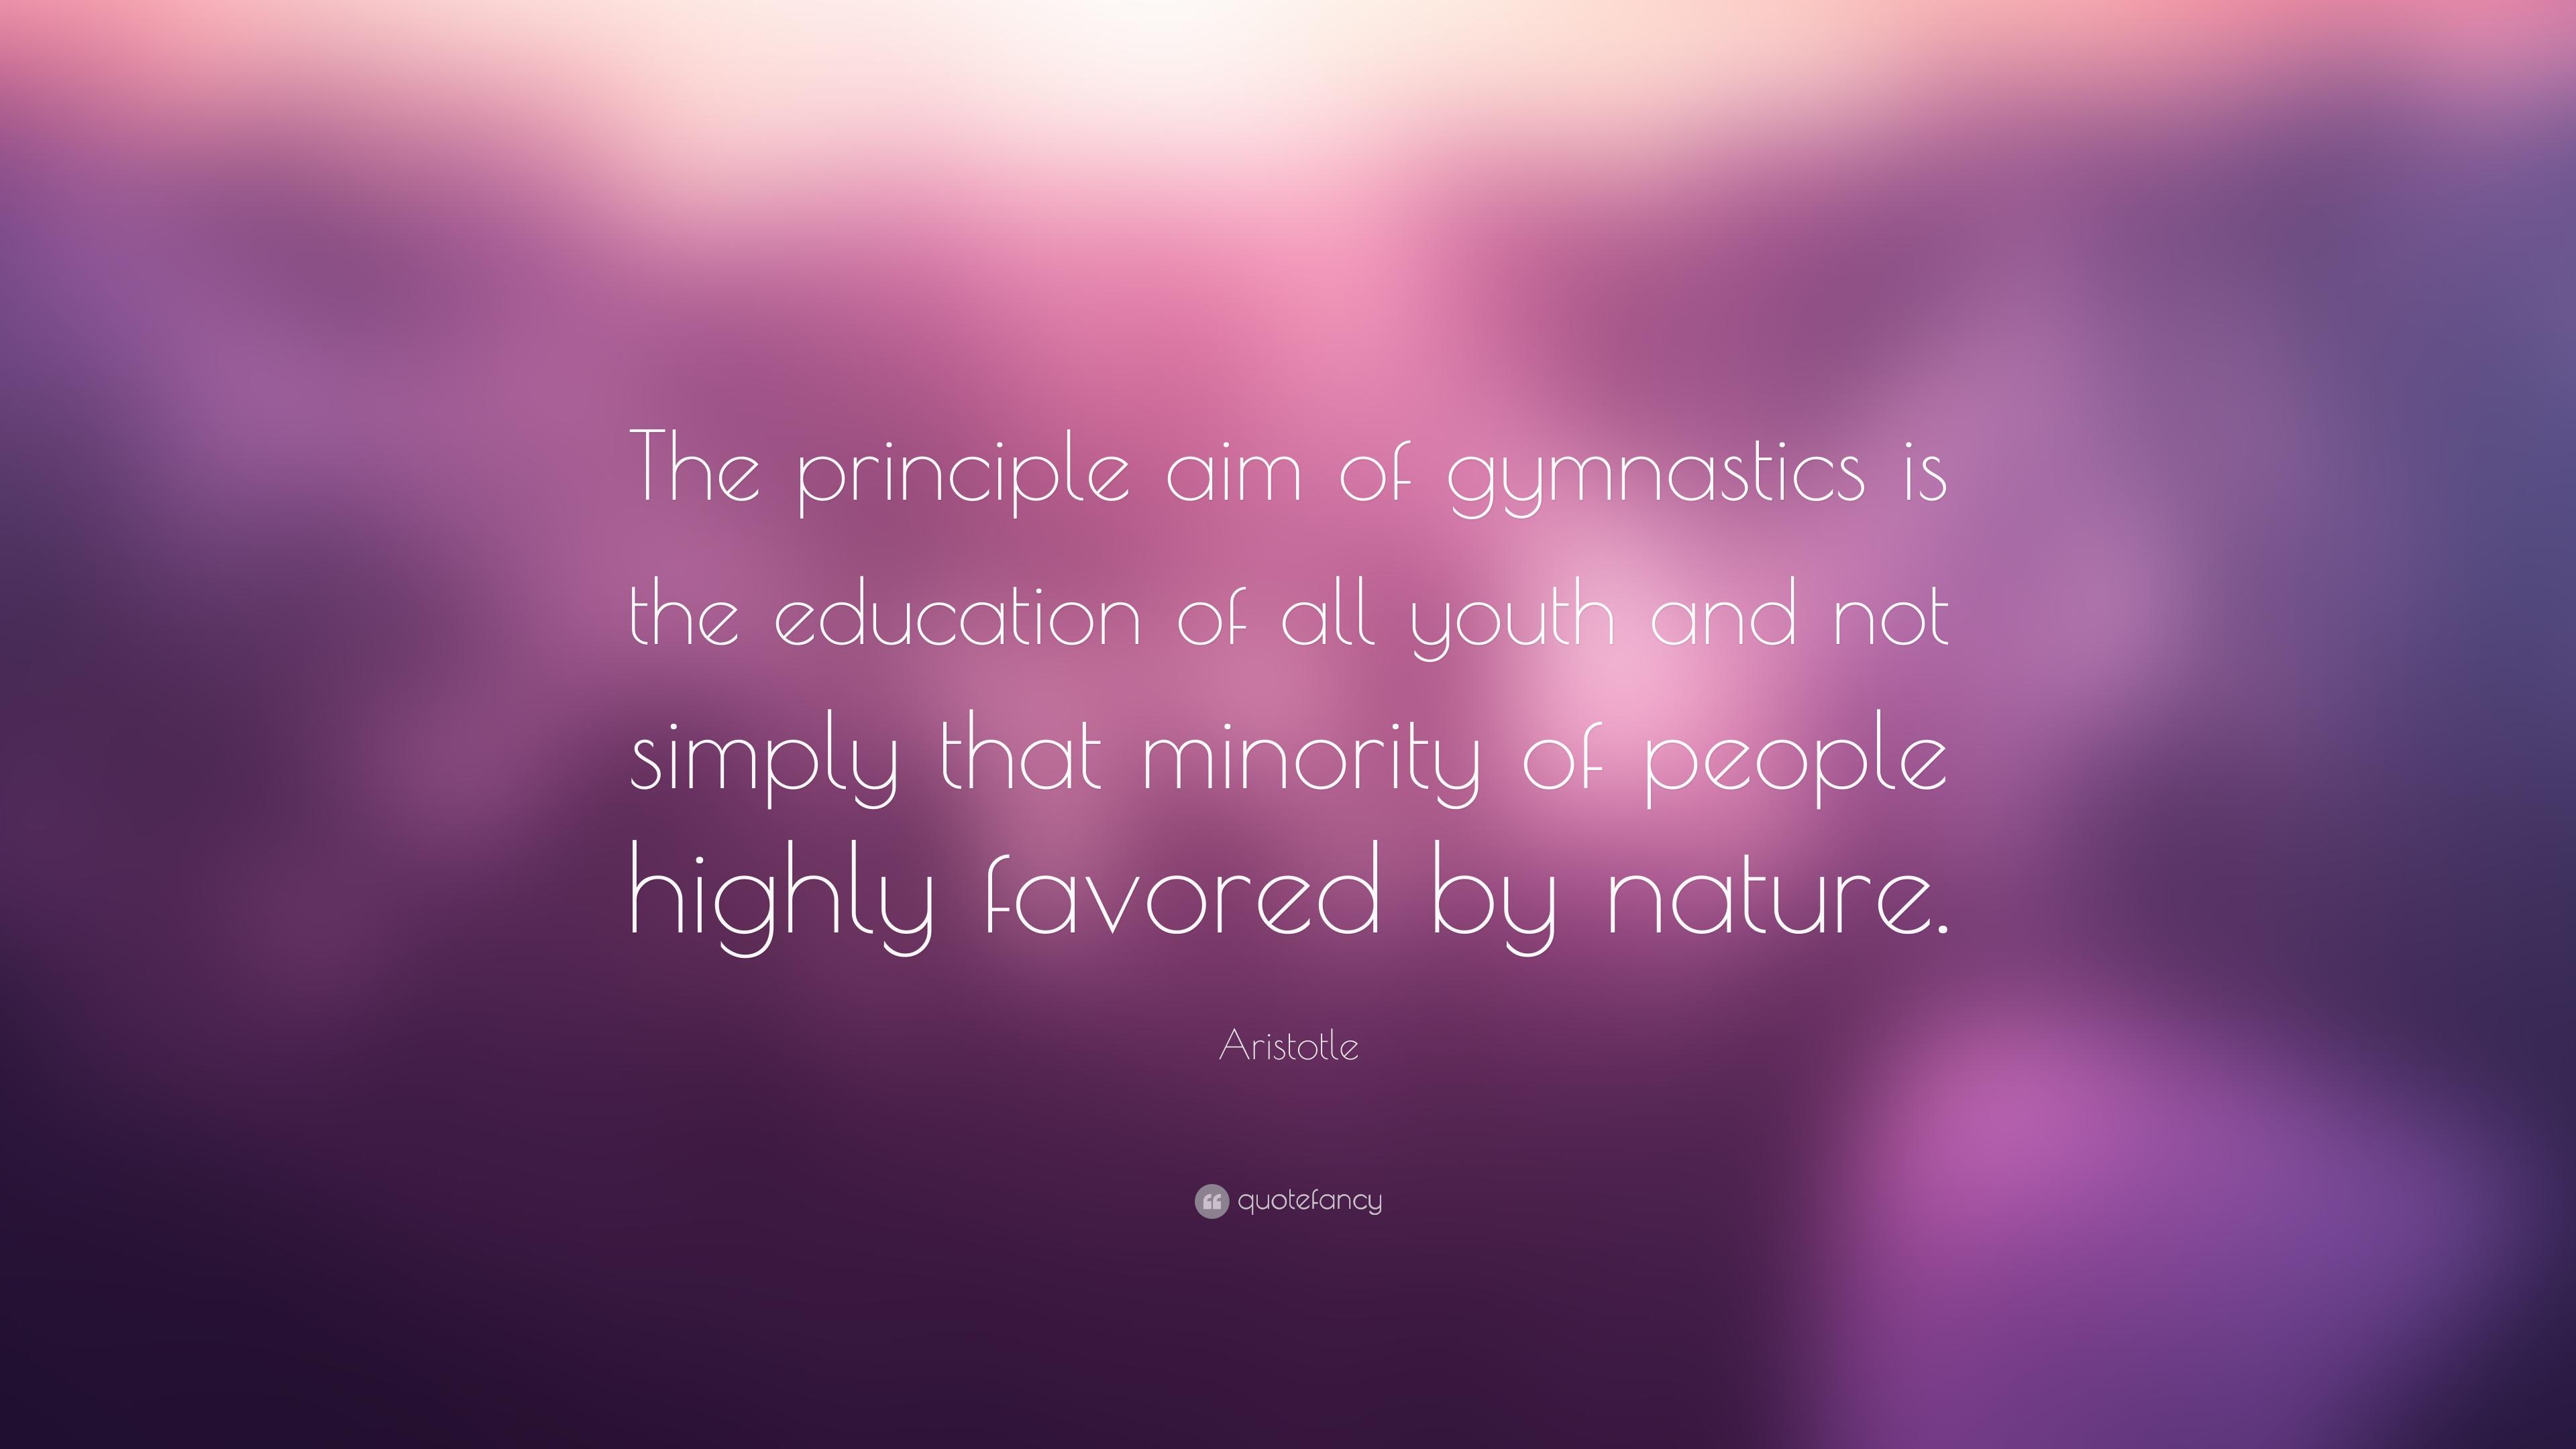 Aristotle Quote: “The principle aim of gymnastics is the education